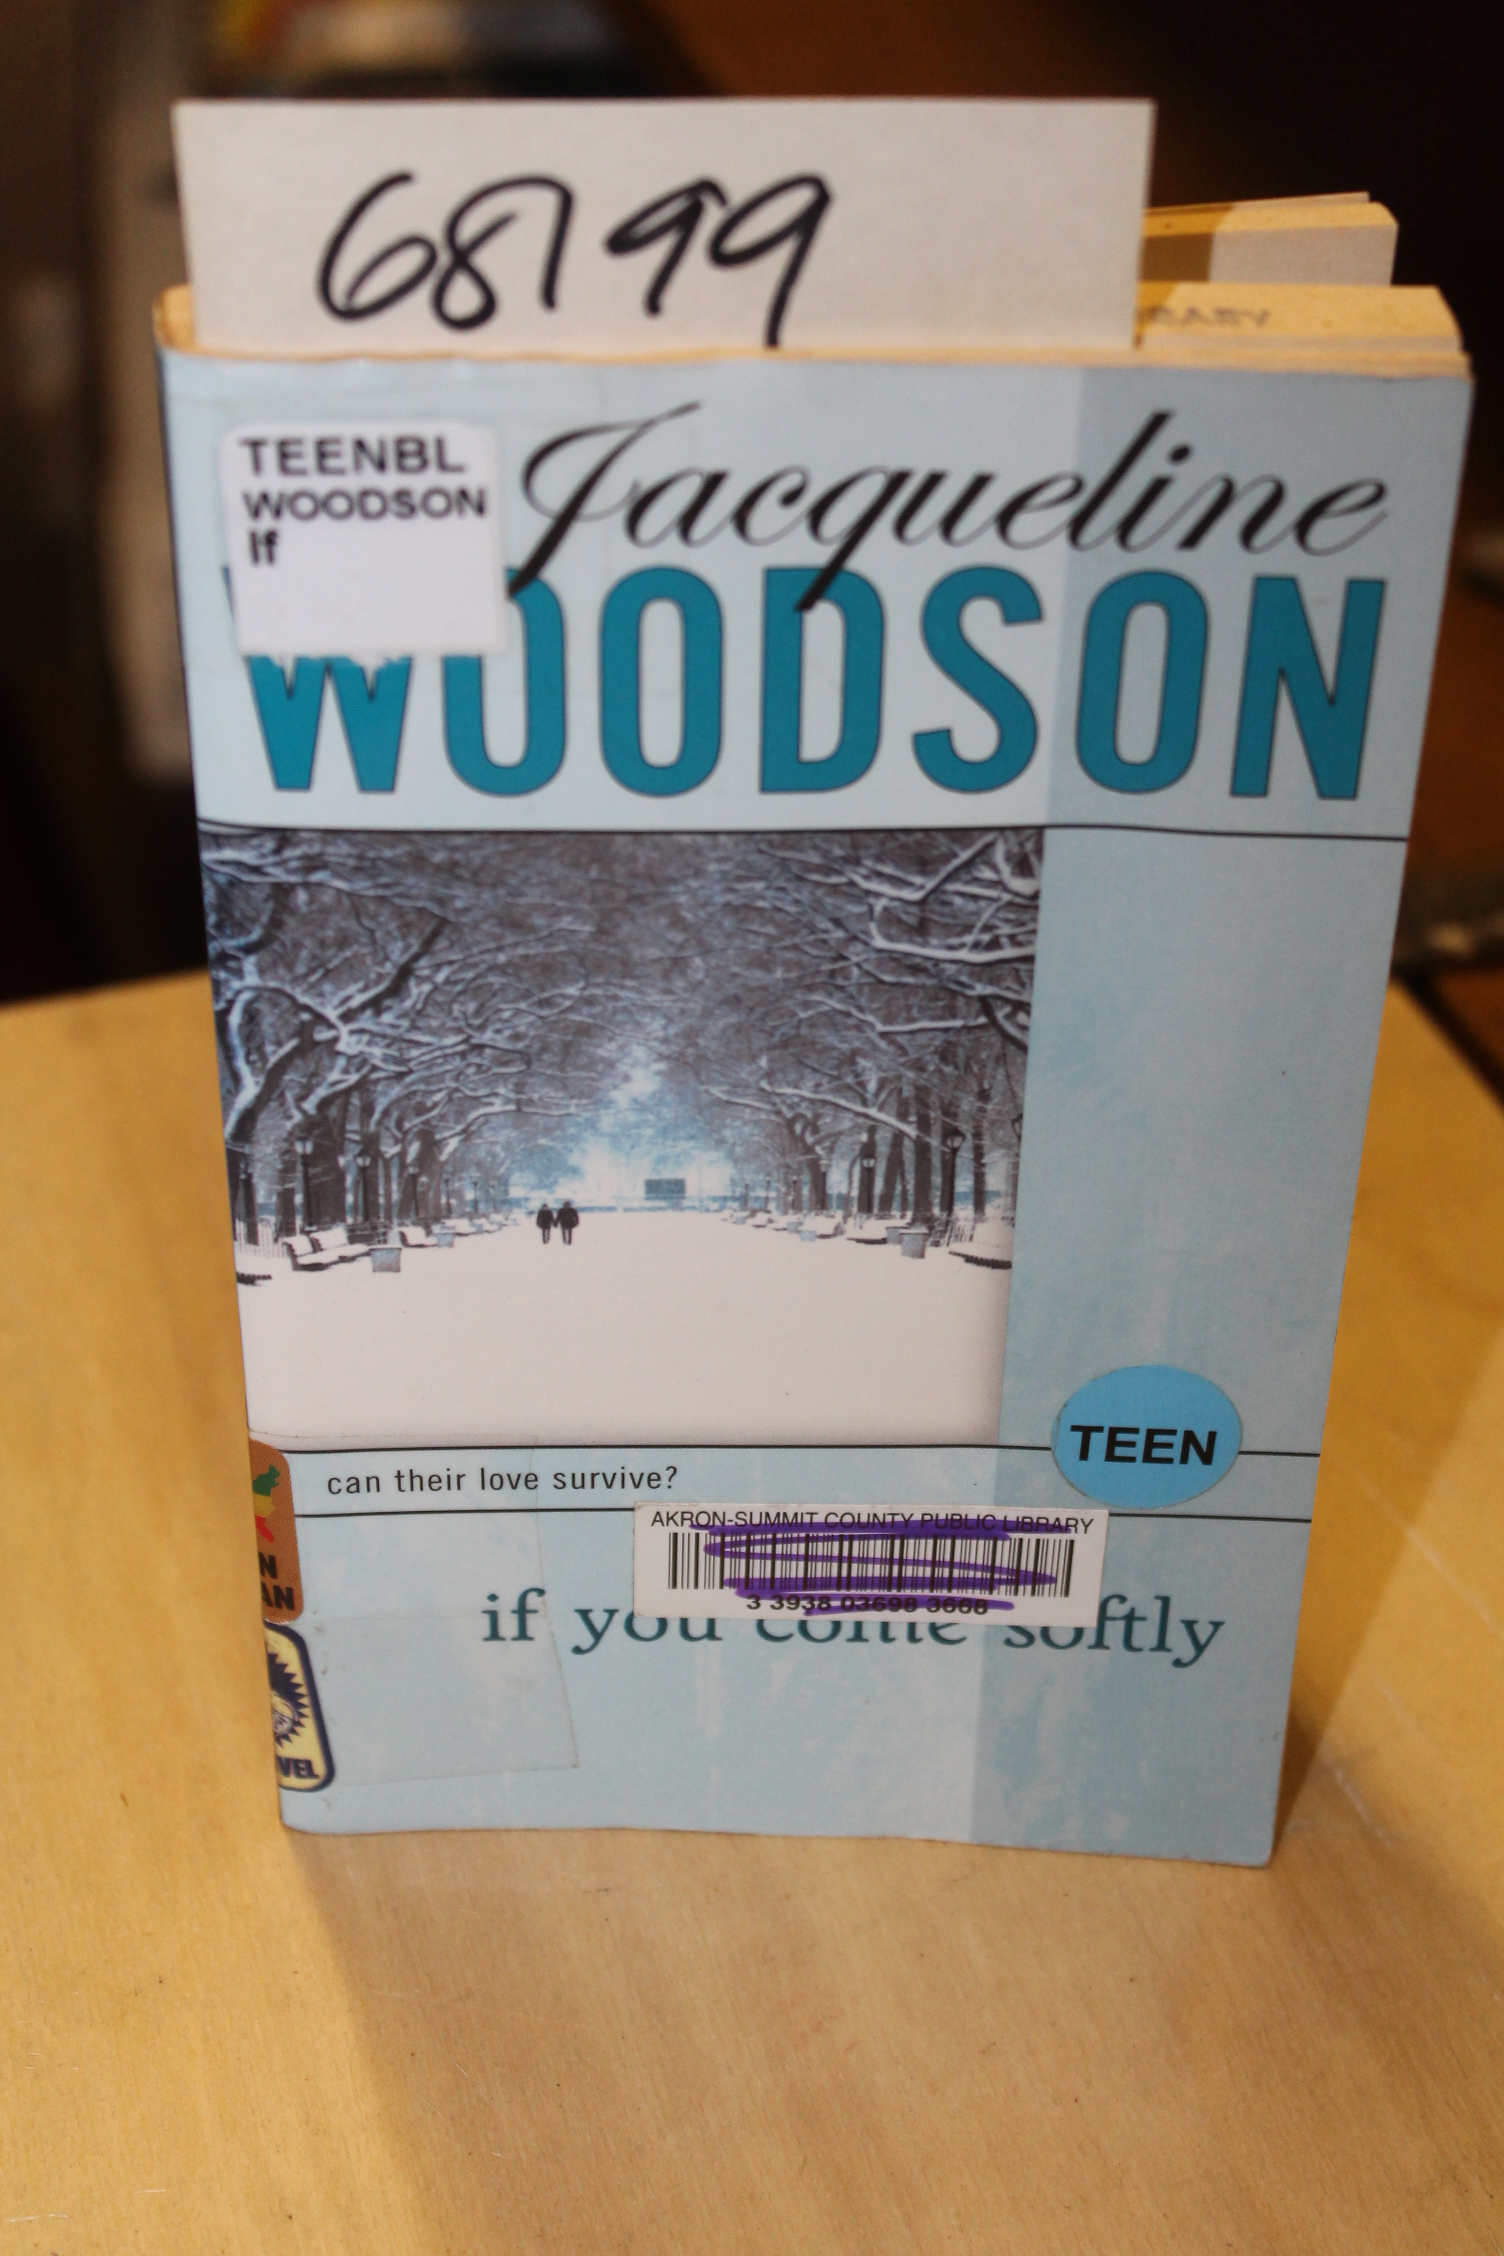 Woodson, Jacqueline: If you come softly